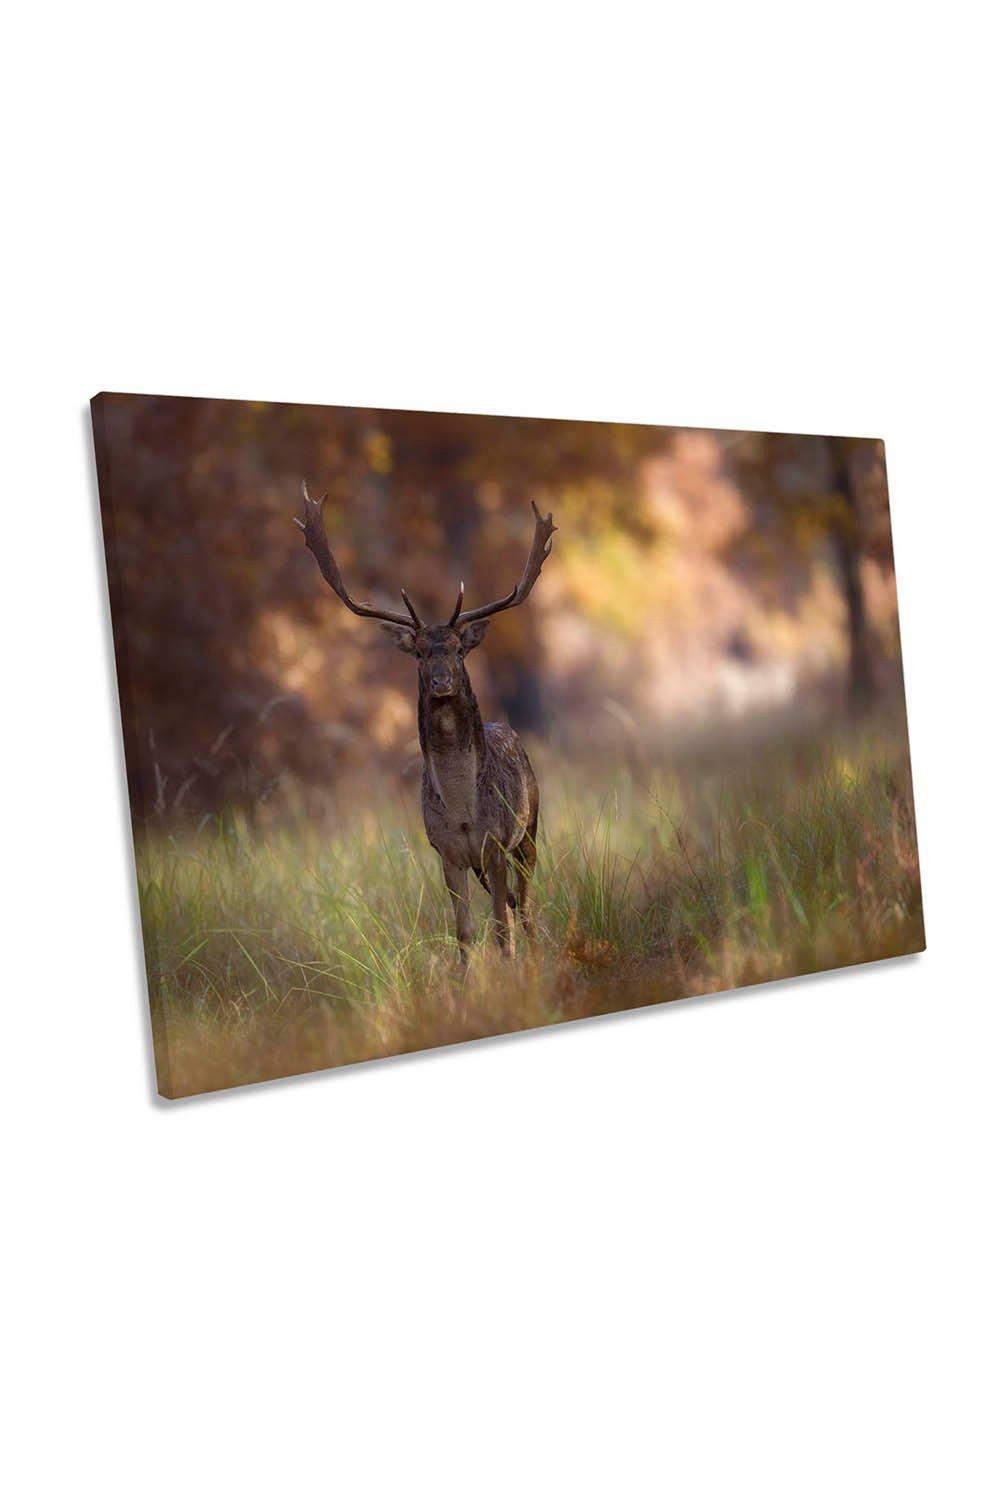 Posing Stag Deer Forest Animal Canvas Wall Art Picture Print